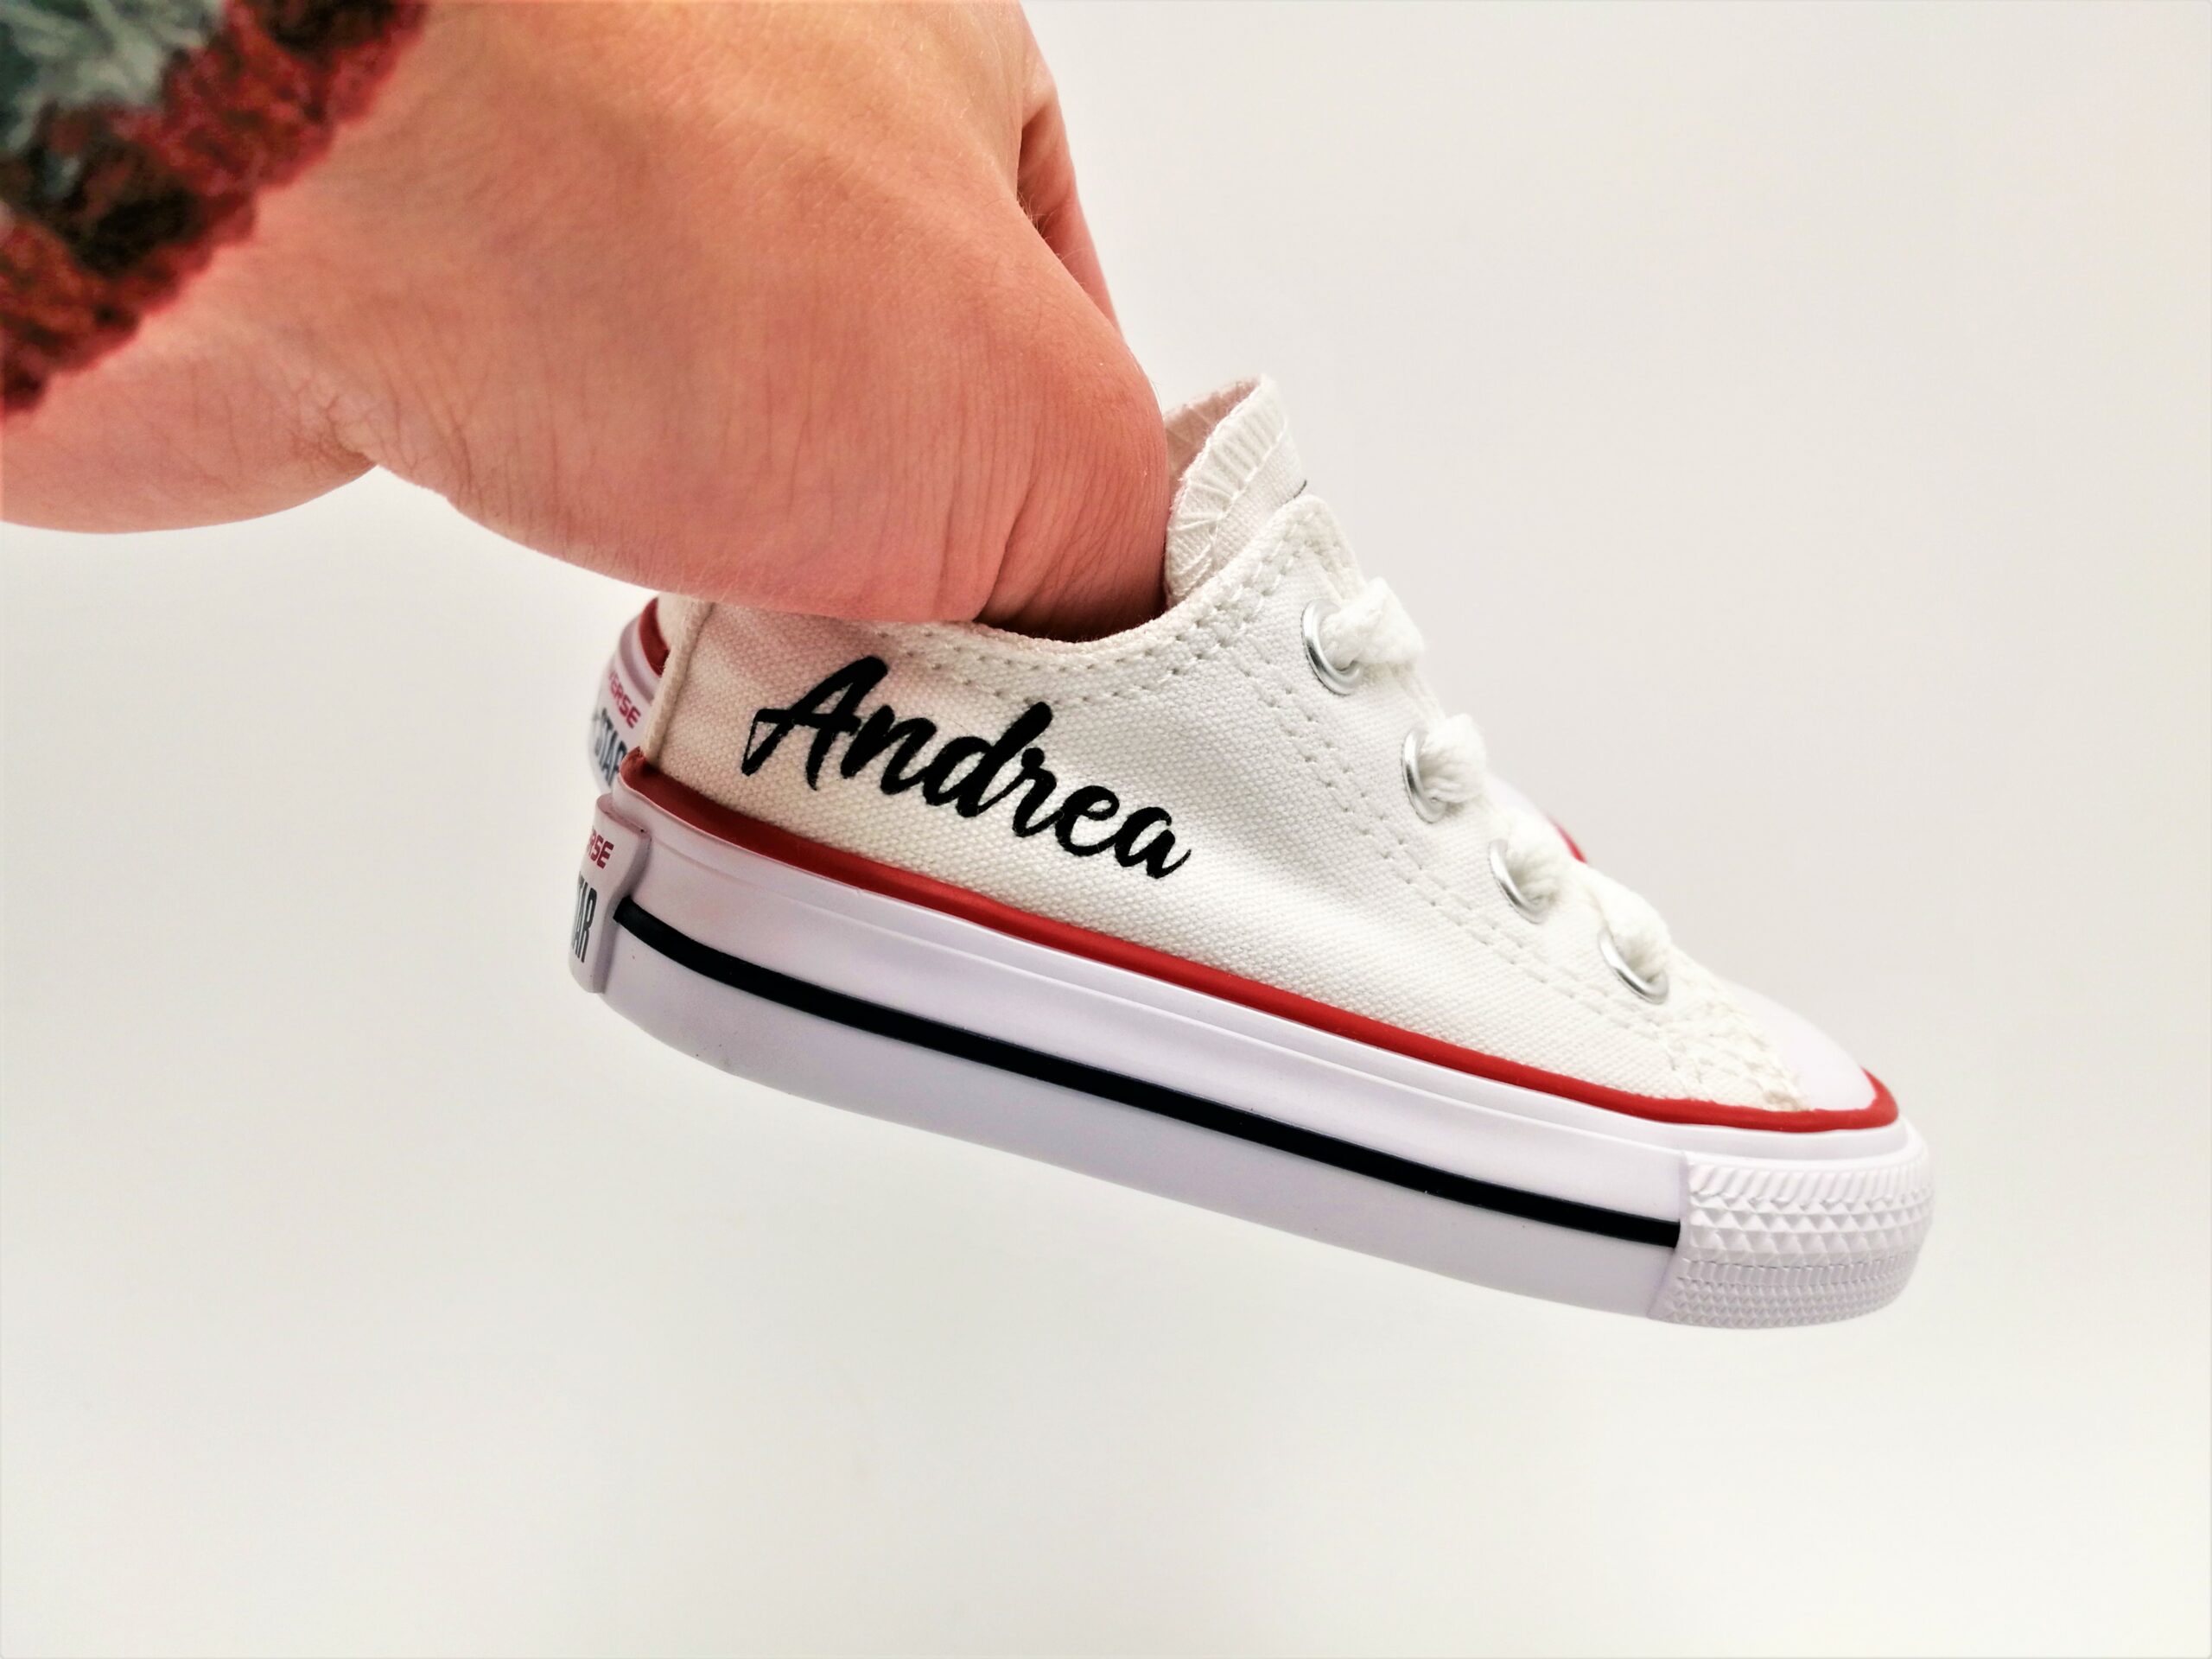 KIDS Converse first name